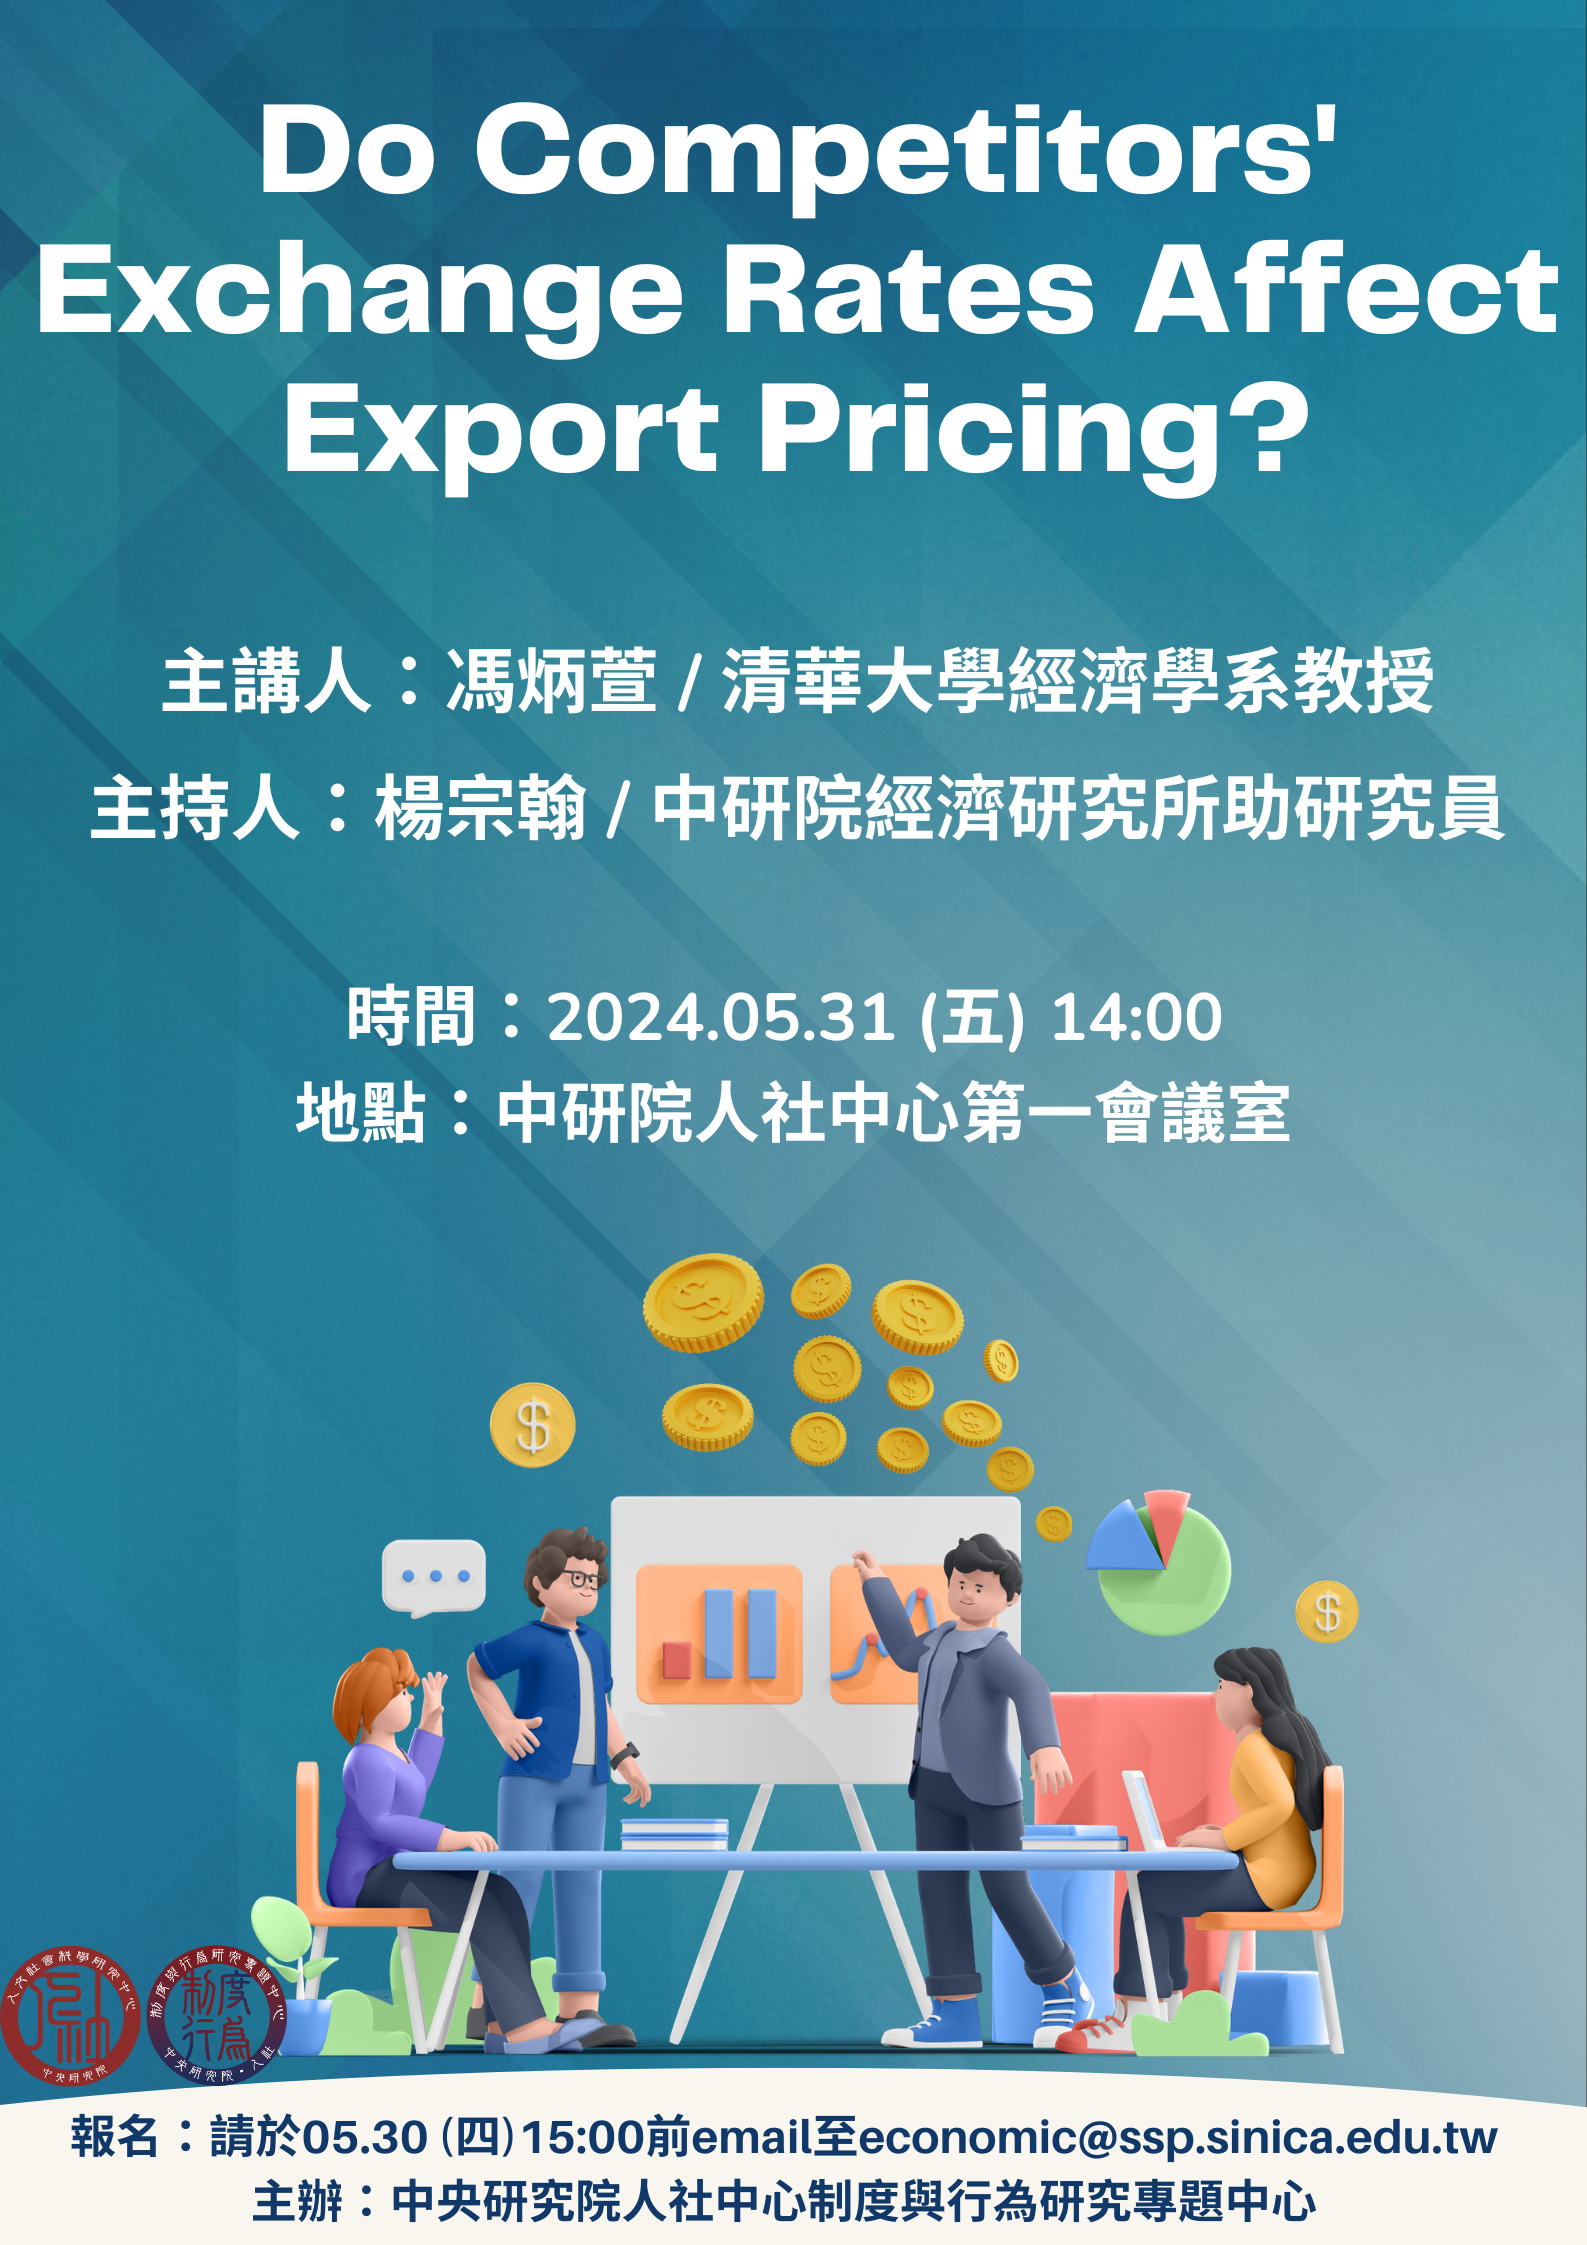 *Do Competitors' Exchange Rates Affect Export Pricing?